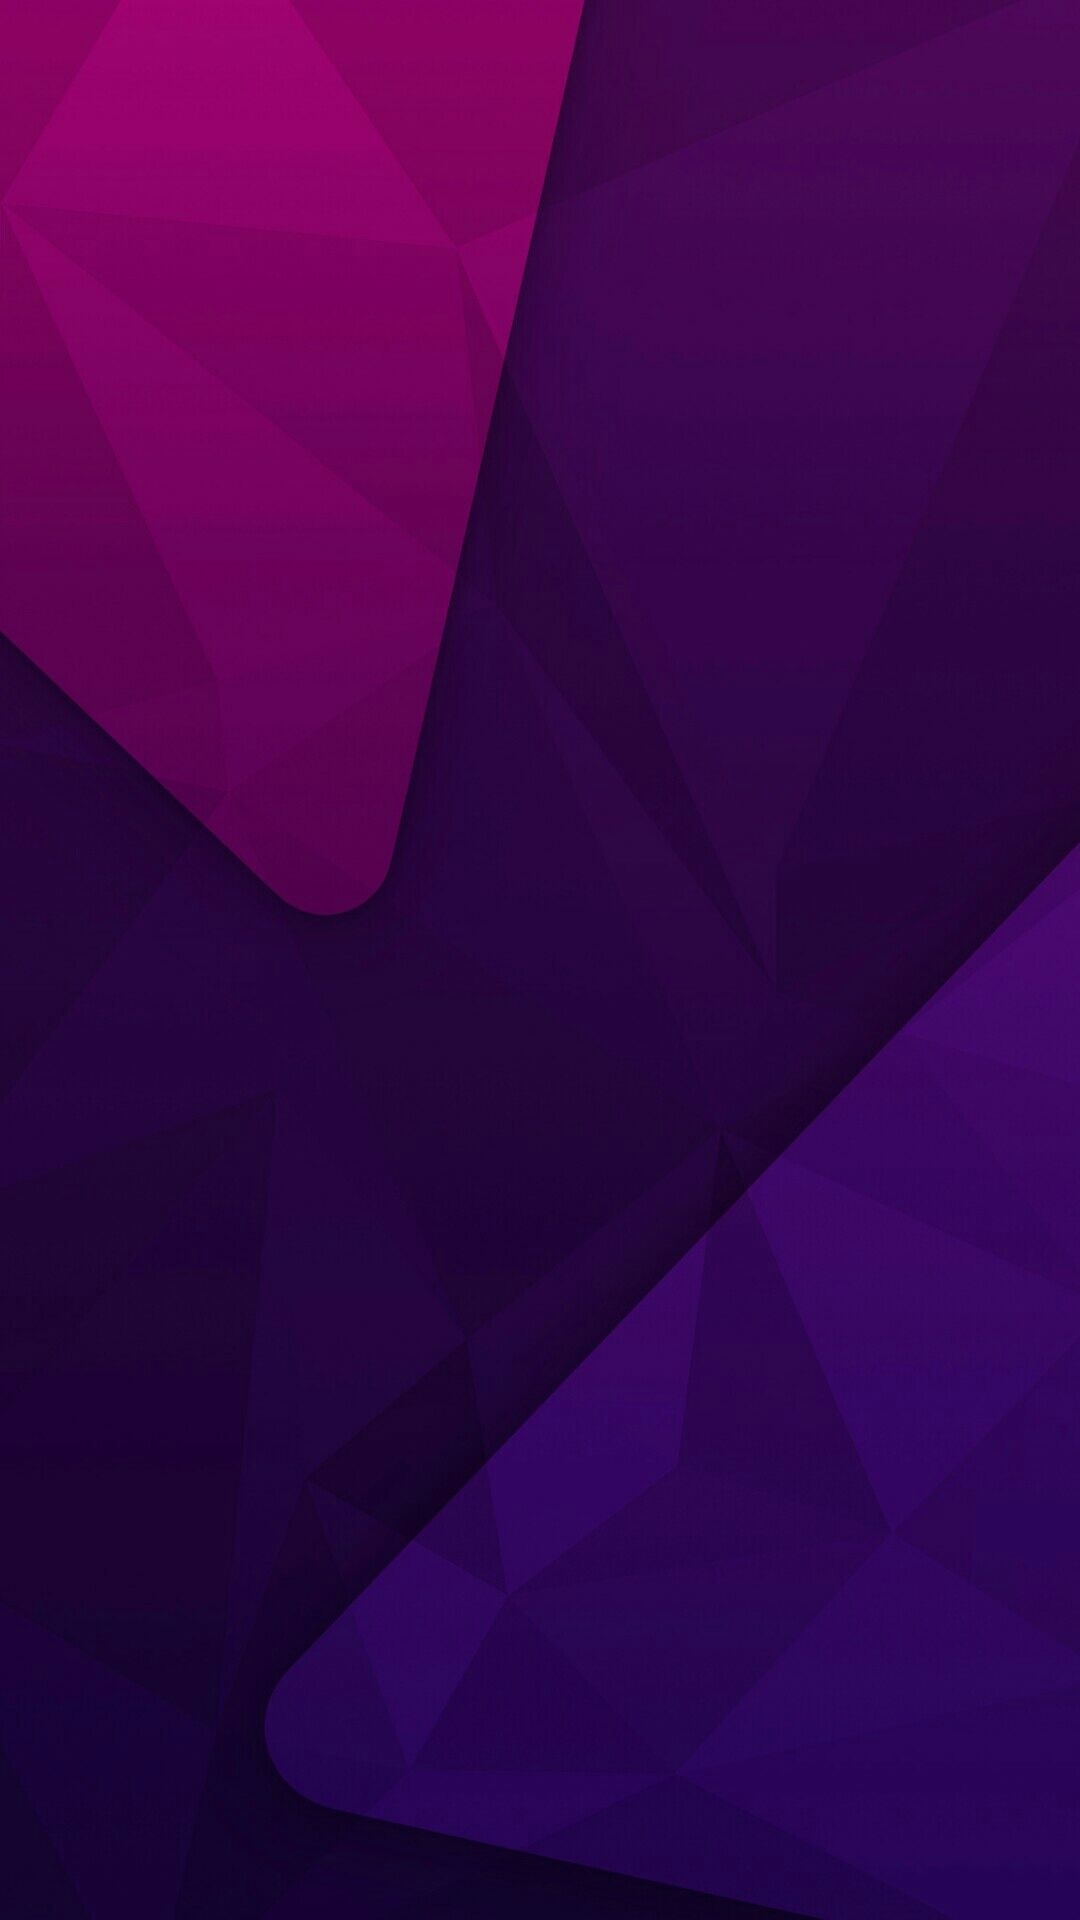 Abstract design pattern, Shape HD mobile wallpaper, Geometric abstract, 1080x1920 Full HD Handy